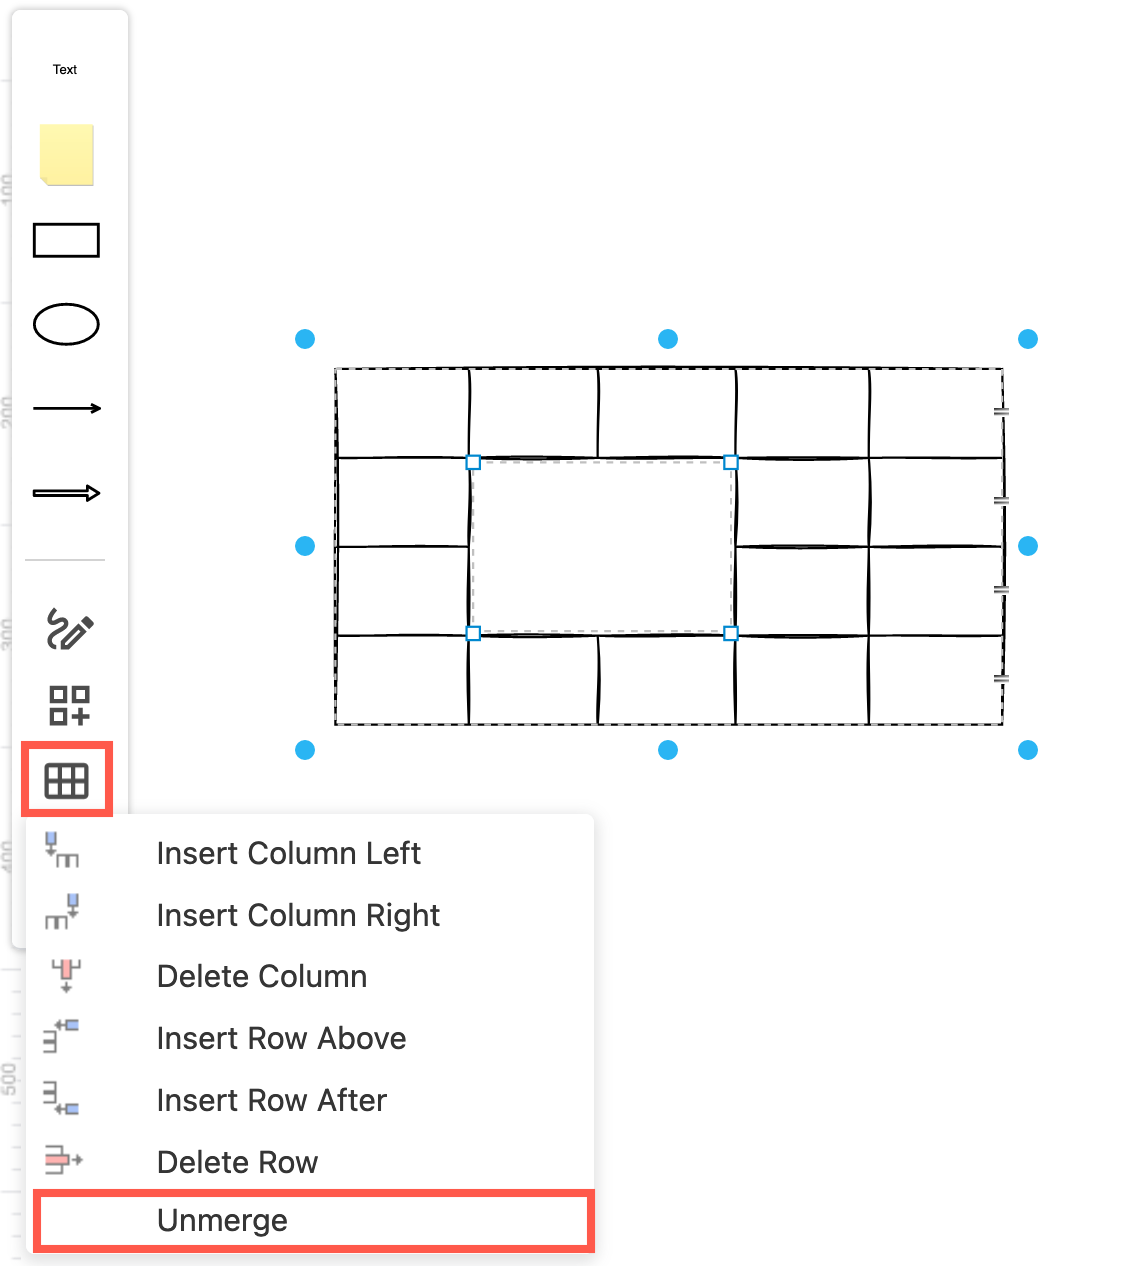 Unmerge table cells in the Sketch whiteboard-like editor theme in diagrams.net and draw.io